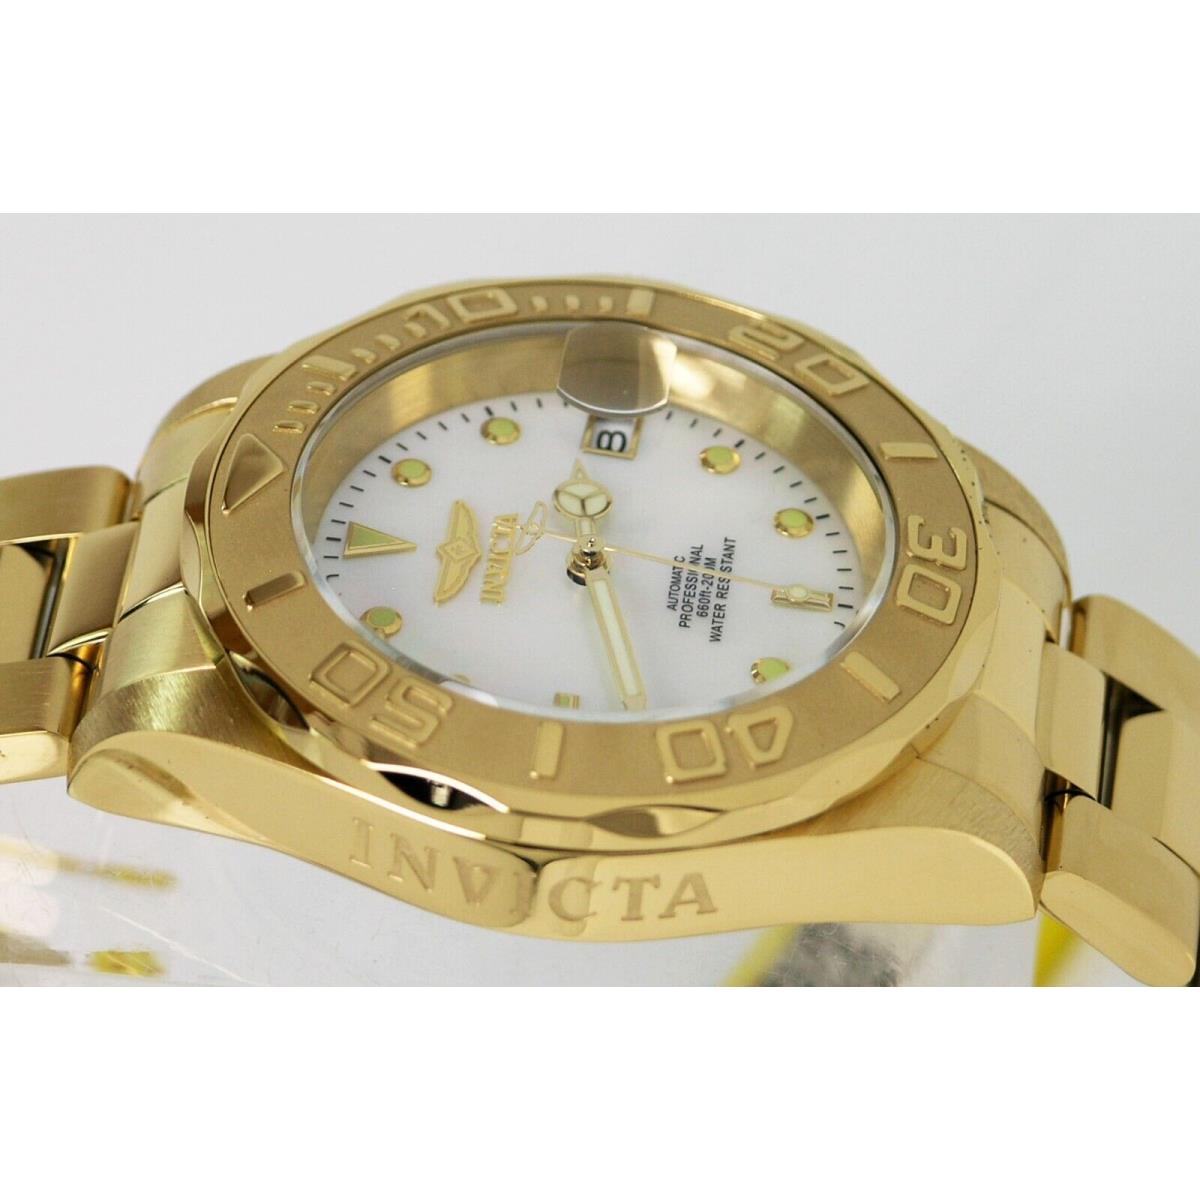 Invicta watch Pro Diver - White Dial, Gold Band, Gold Bezel